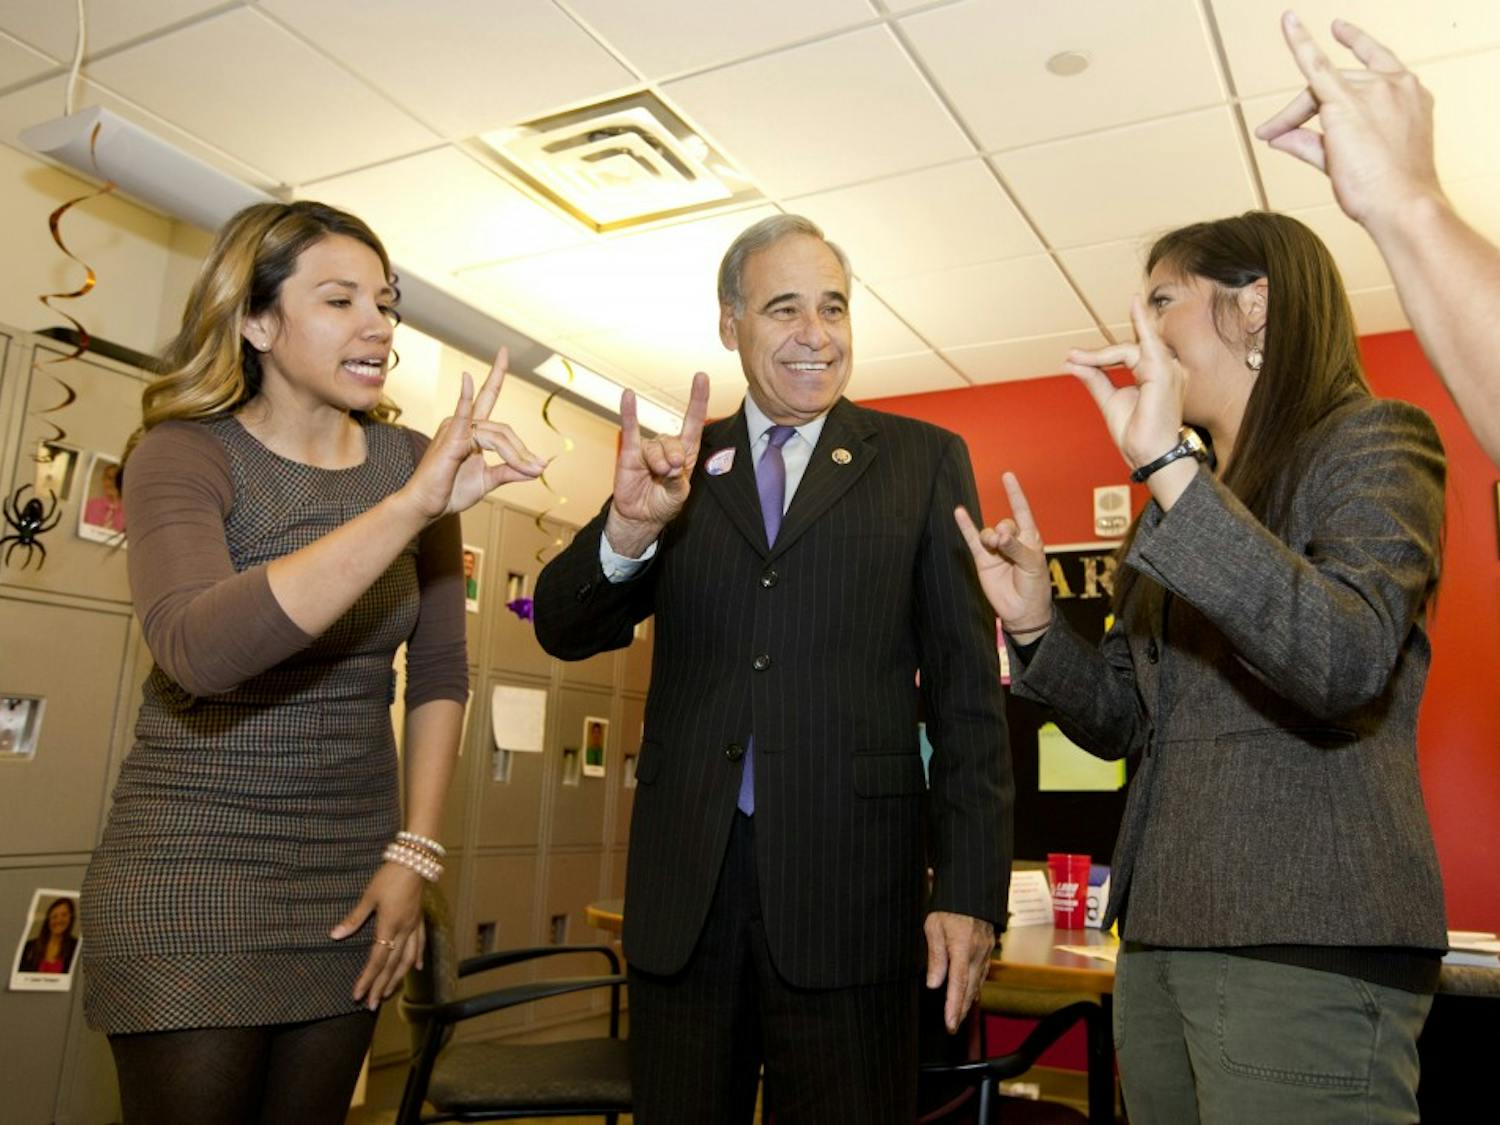 	ASUNM President Caroline Muraida (right) and ASUNM Executive Director of Governmental Affairs Cindy Nava teach Rep. Charlie Gonzalez (D-Texas) how to make the Lobo hand signal. Gonzalez visited the University to learn about student support for the DREAM Act but ended up discussing funding for education, which he said should be a priority to ensure the doors for opportunities remain open for students.